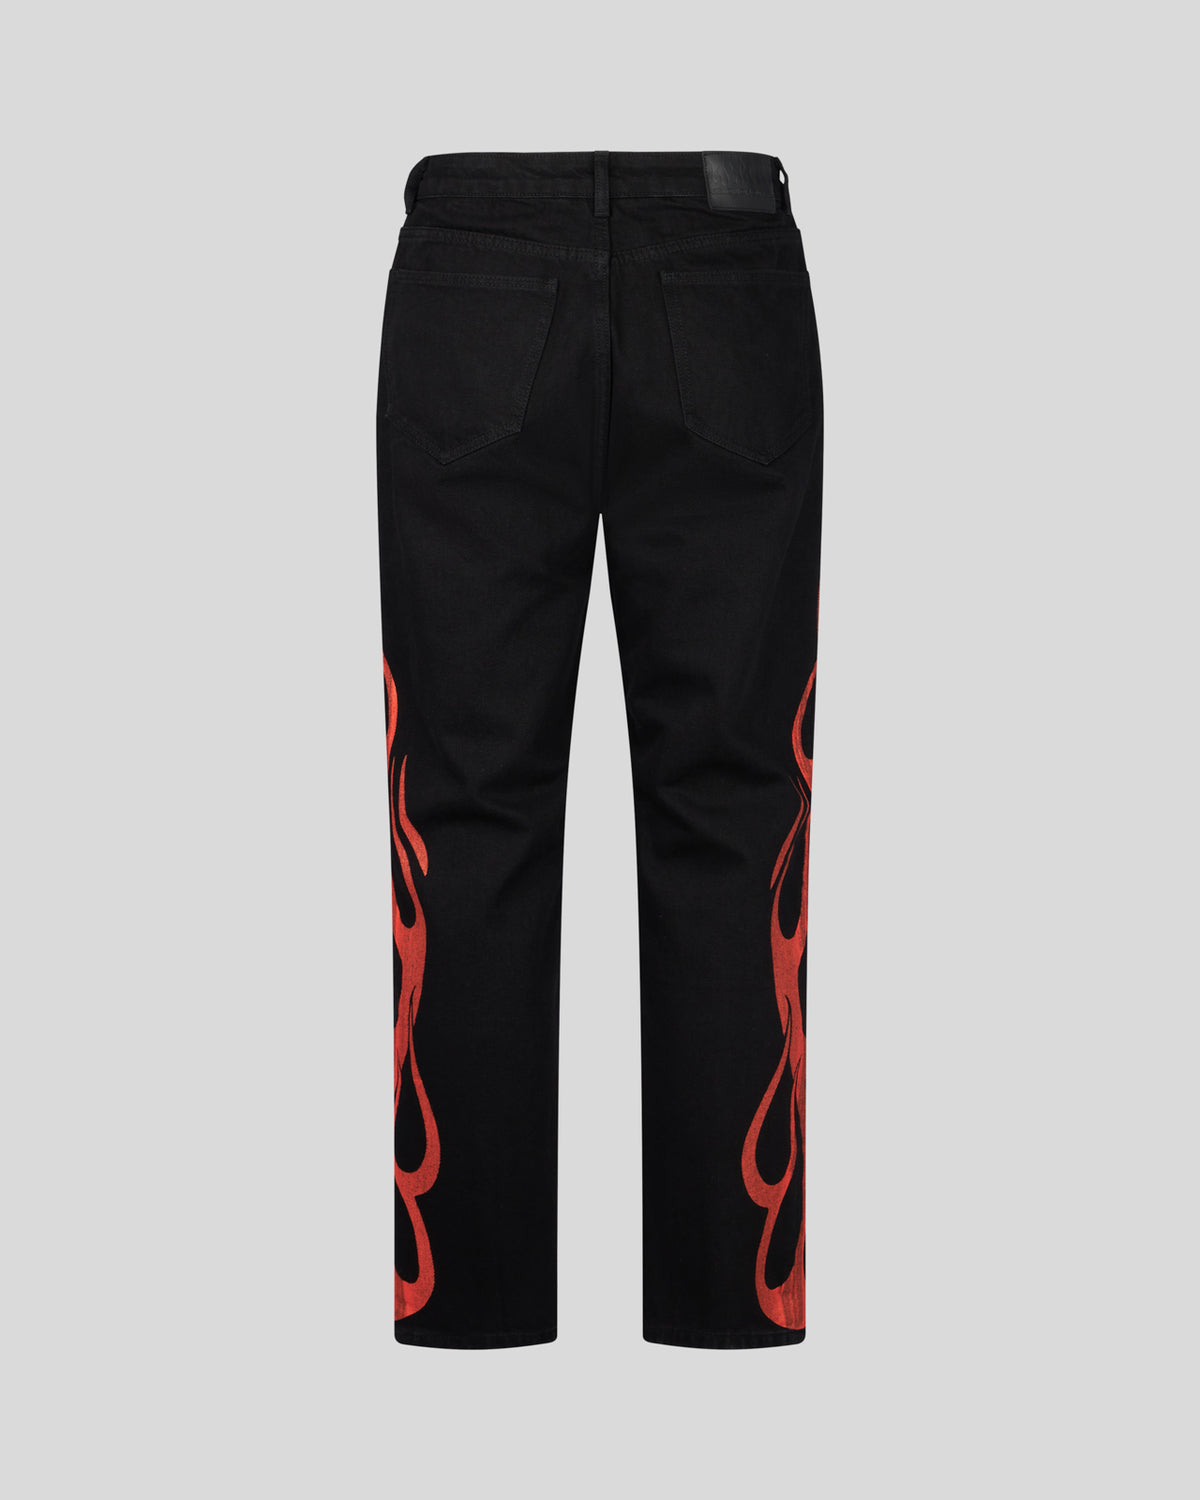 VISION OF SUPER BLACK JEANS WITH RED FLAMES